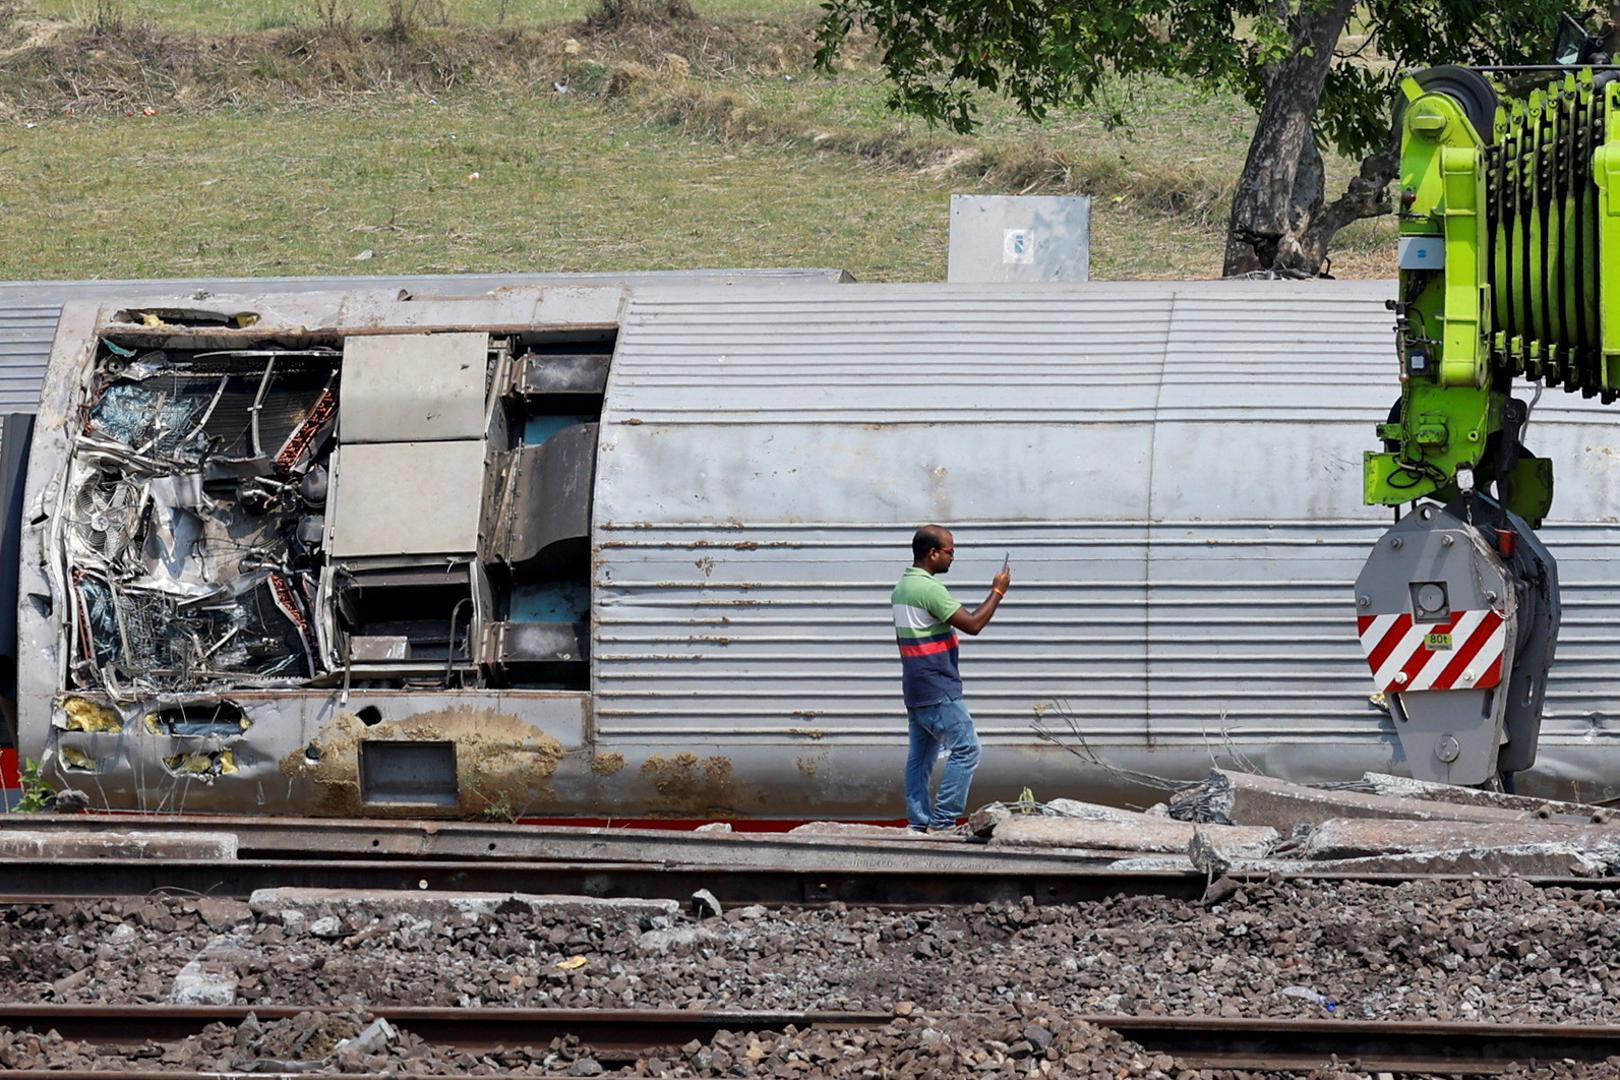 A man takes pictures of a damaged coach at the site of a train collision following the accident in Balasore district in the eastern state of Odisha, India, June 4, 2023. REUTERS/Adnan Abidi Photo: ADNAN ABIDI/REUTERS